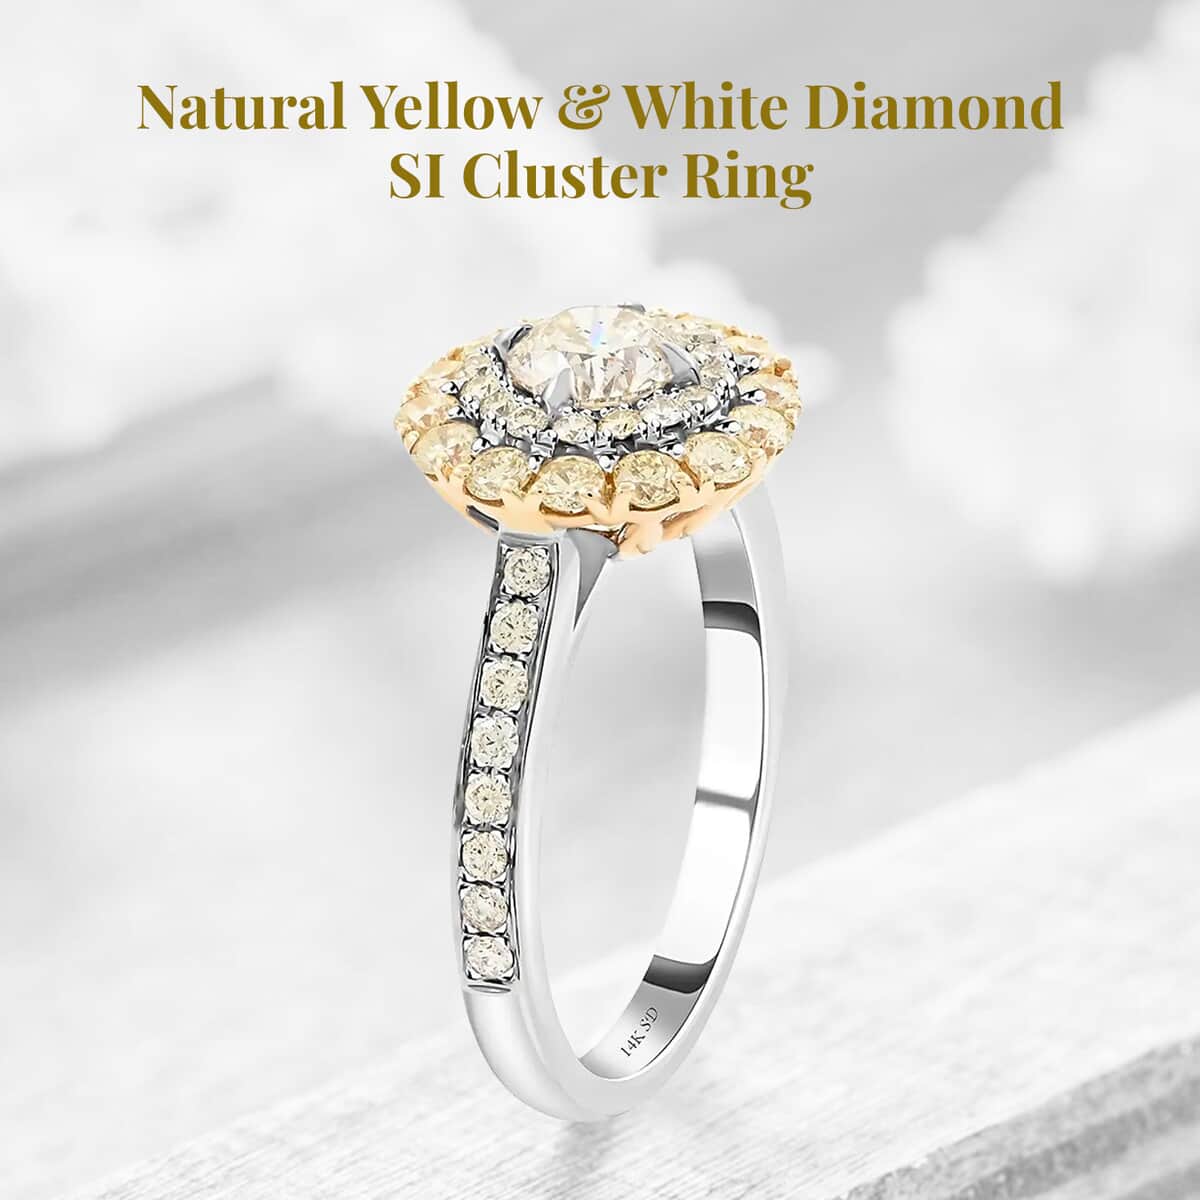 Modani 14K White & Yellow Gold Natural Yellow and White Diamond SI Ring (Size 10.0) 1.25 ctw (Del. in 10-12 Days) image number 2